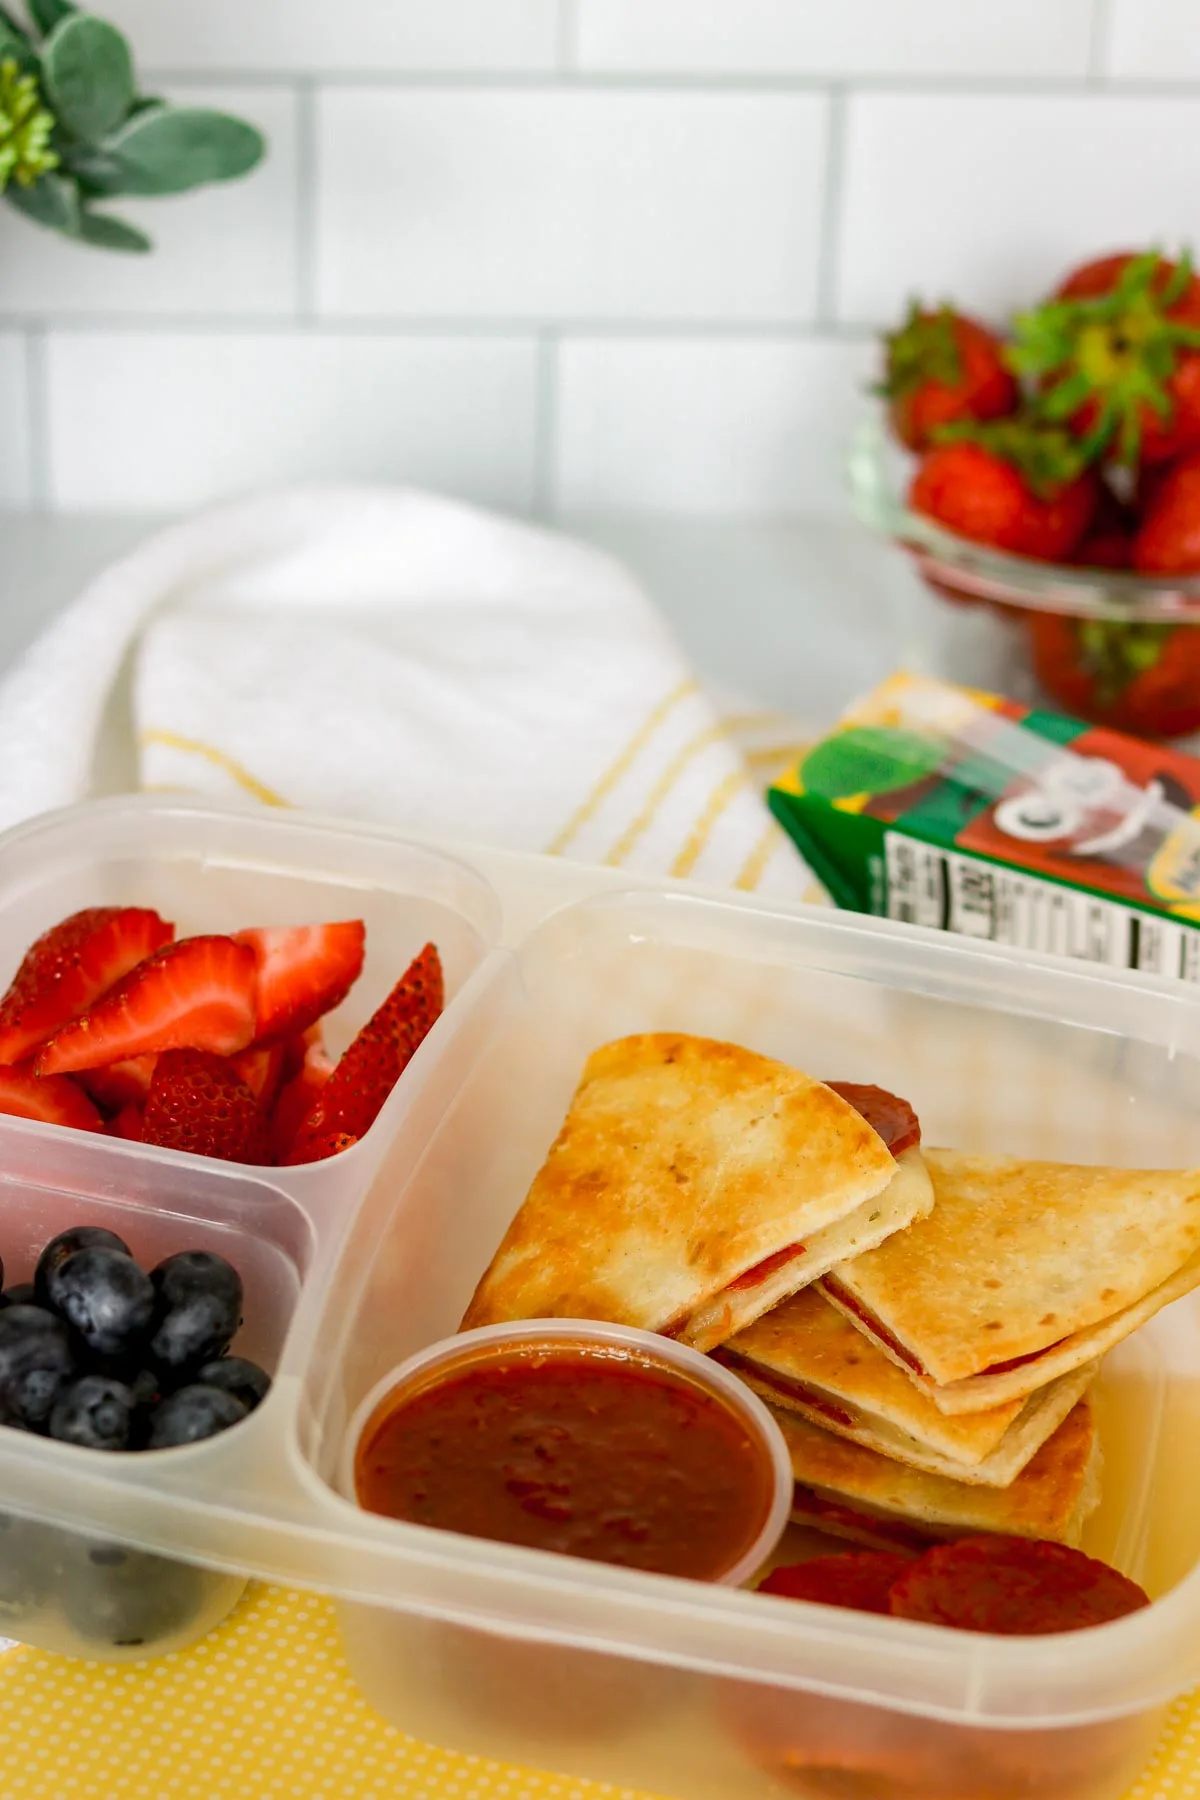 Pepperoni pizzadillas packed for a kid's lunch in a bento box with berries.